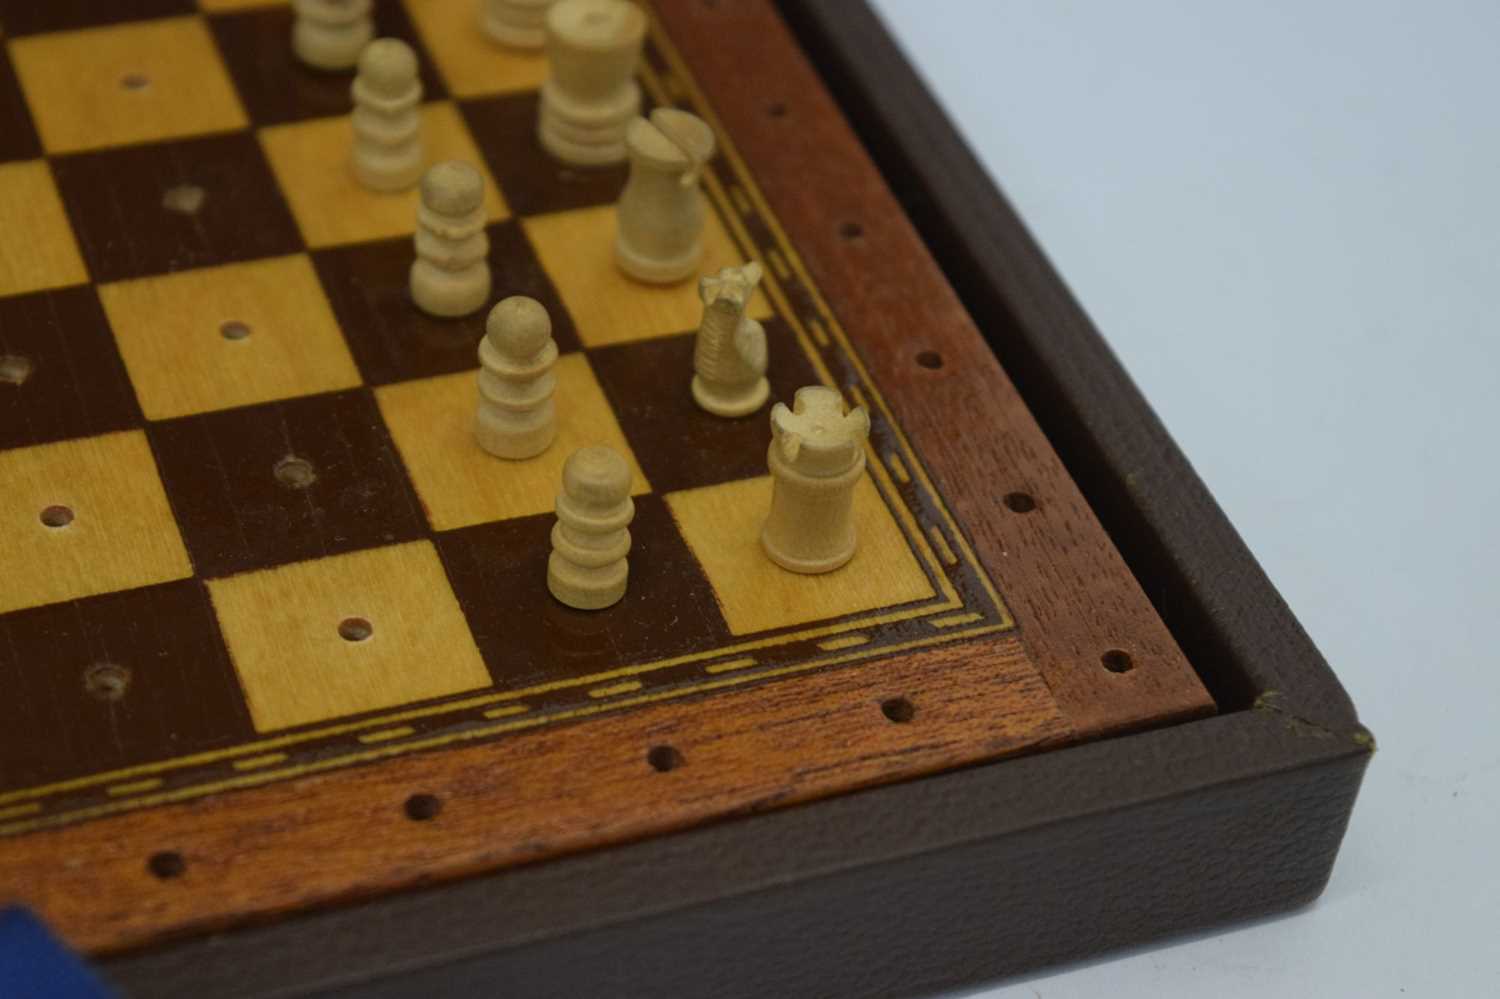 20th century travel chess set by Jaques of London - Image 6 of 7